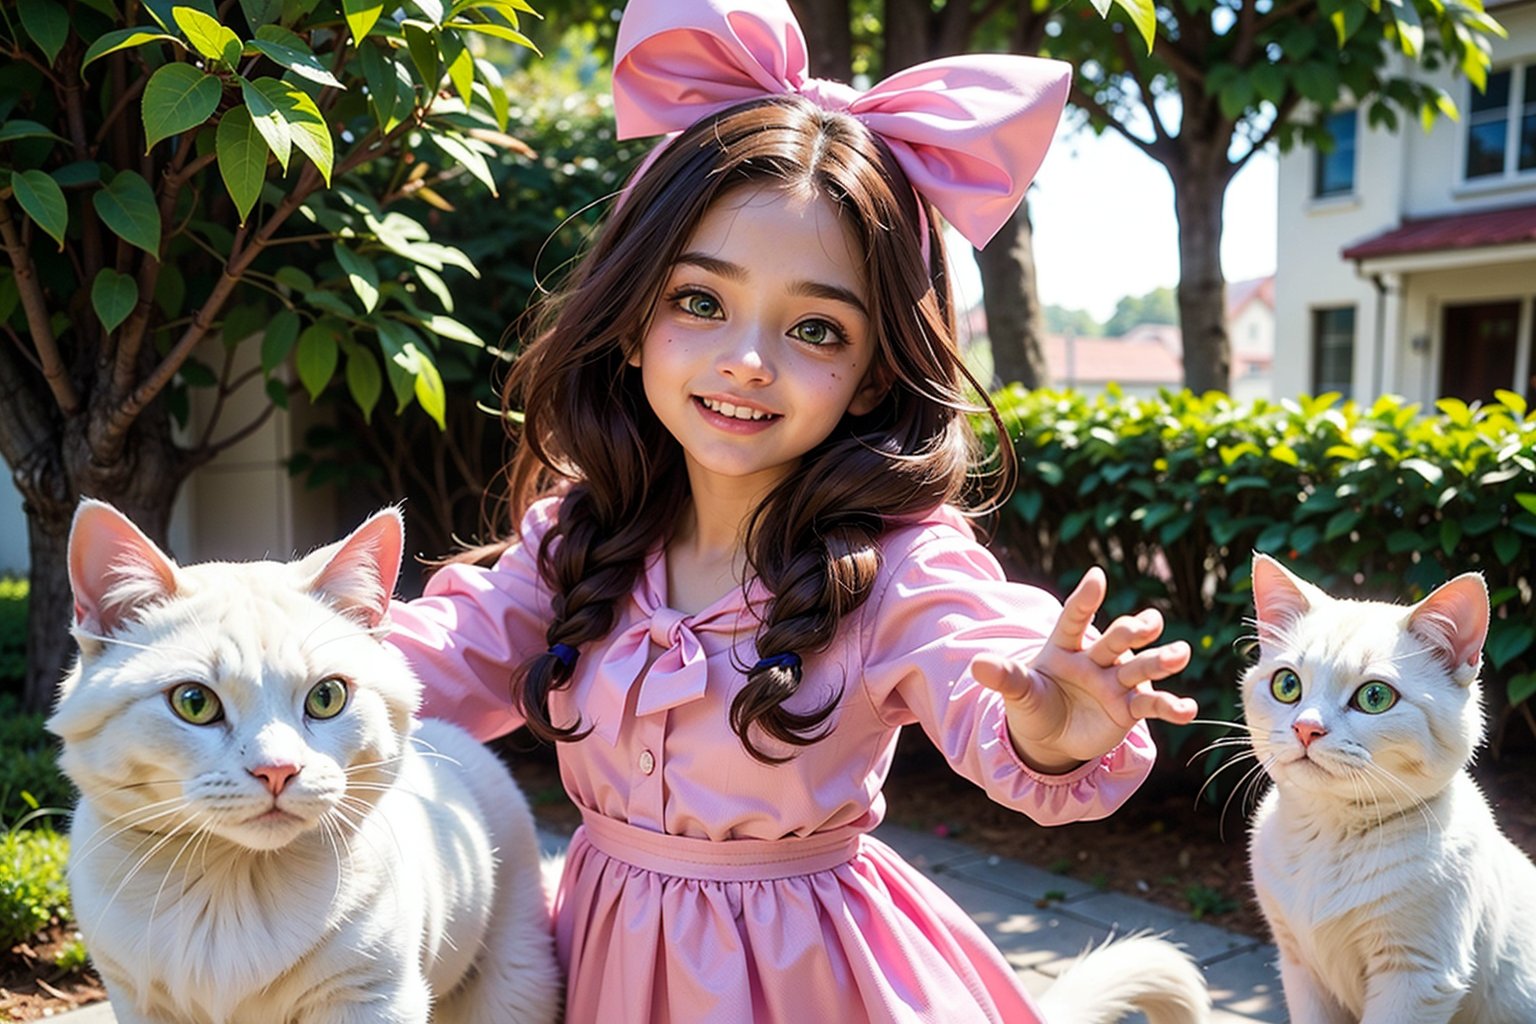 Rani, a bright-eyed 7-year-old with flowing brown hair and emerald green eyes, Mittens, a spunky white cat with black spots

After breakfast, Rani and Mittens prepared for their trip to the park. ((Rani put on her favorite pink dress and tied her hair with a red ribbon)). Mittens, her tail swaying excitedly, followed Rani with enthusiasm